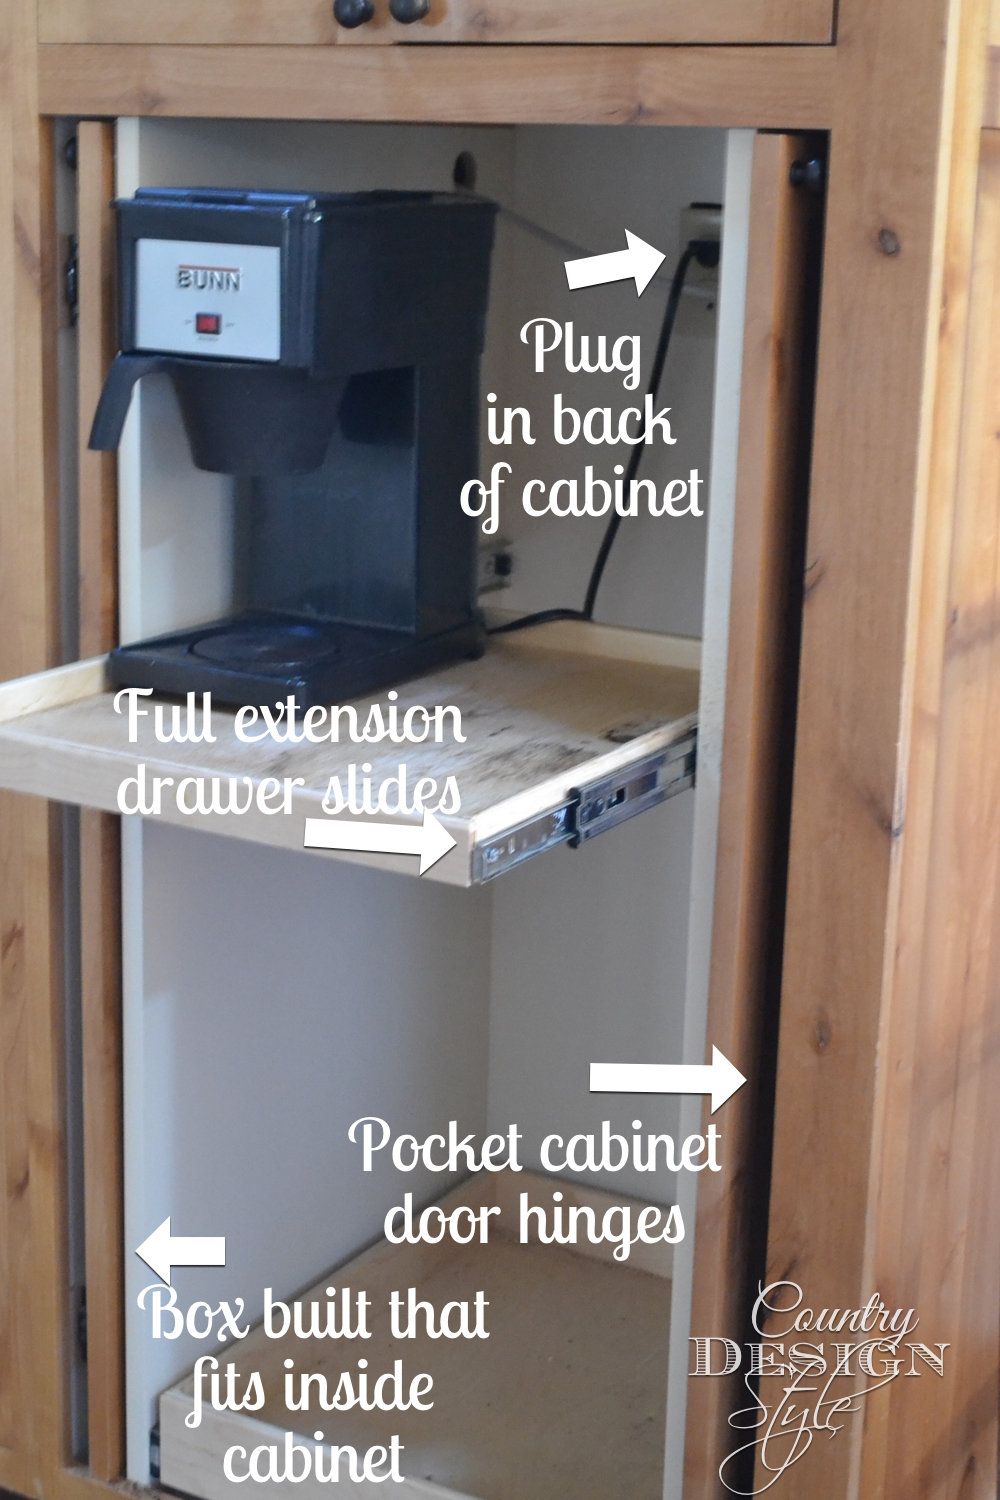 Parts needed to turn a cabinet into a coffee station. A great DIY project for anyone. Country Design Style